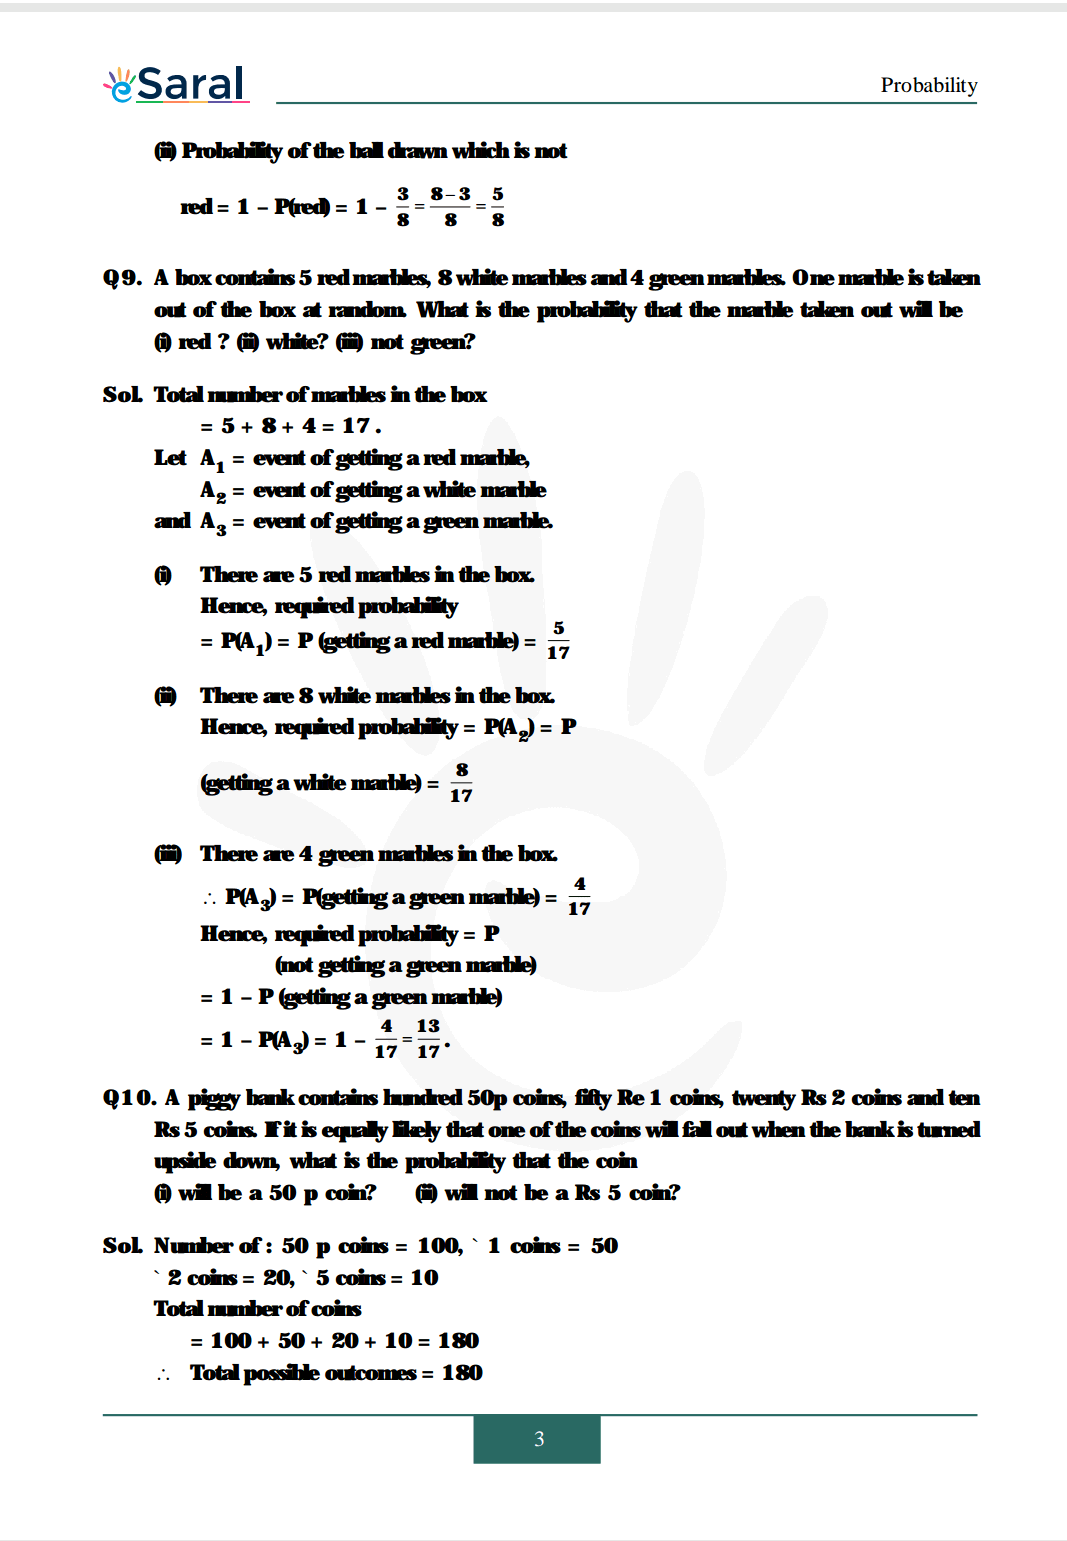 Class 10 Maths Chapter 15 exercise 15.1 solutions Image 3